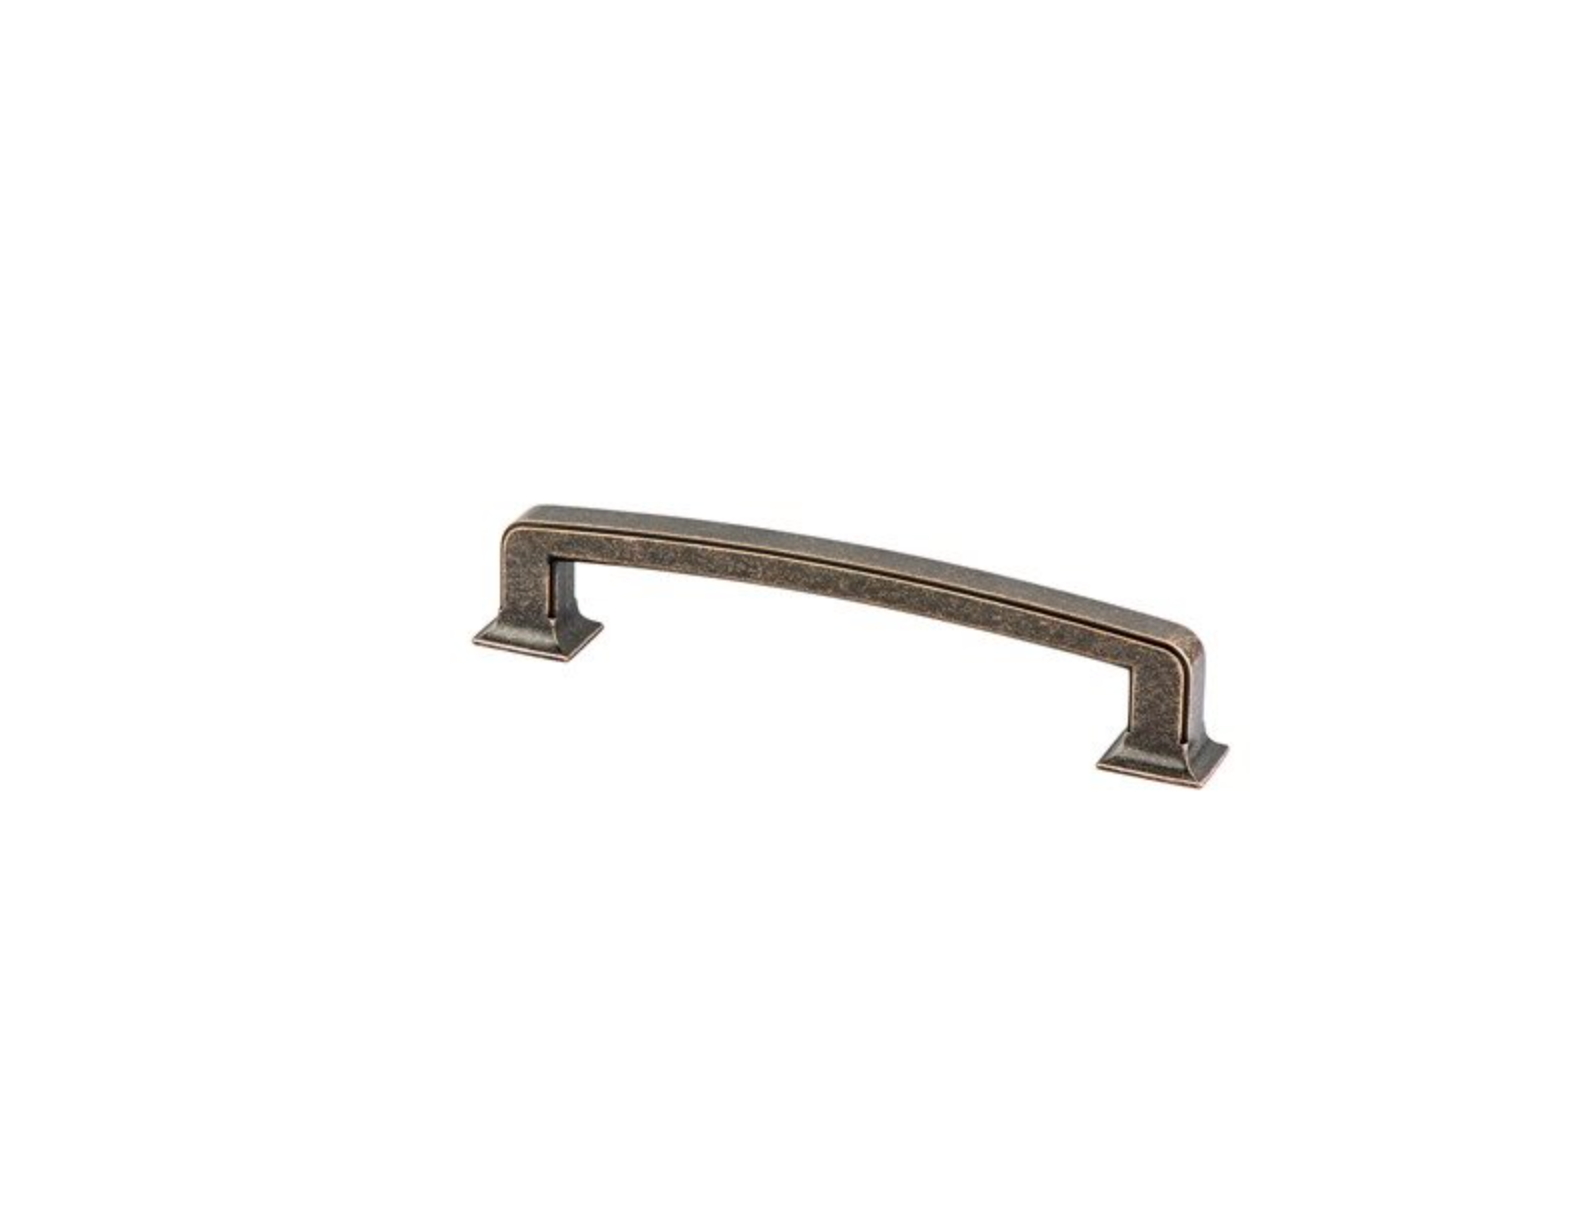 Distressed Bronze "Liana" Drawer Pulls and Knobs for Cabinets and Furniture - Industry Hardware